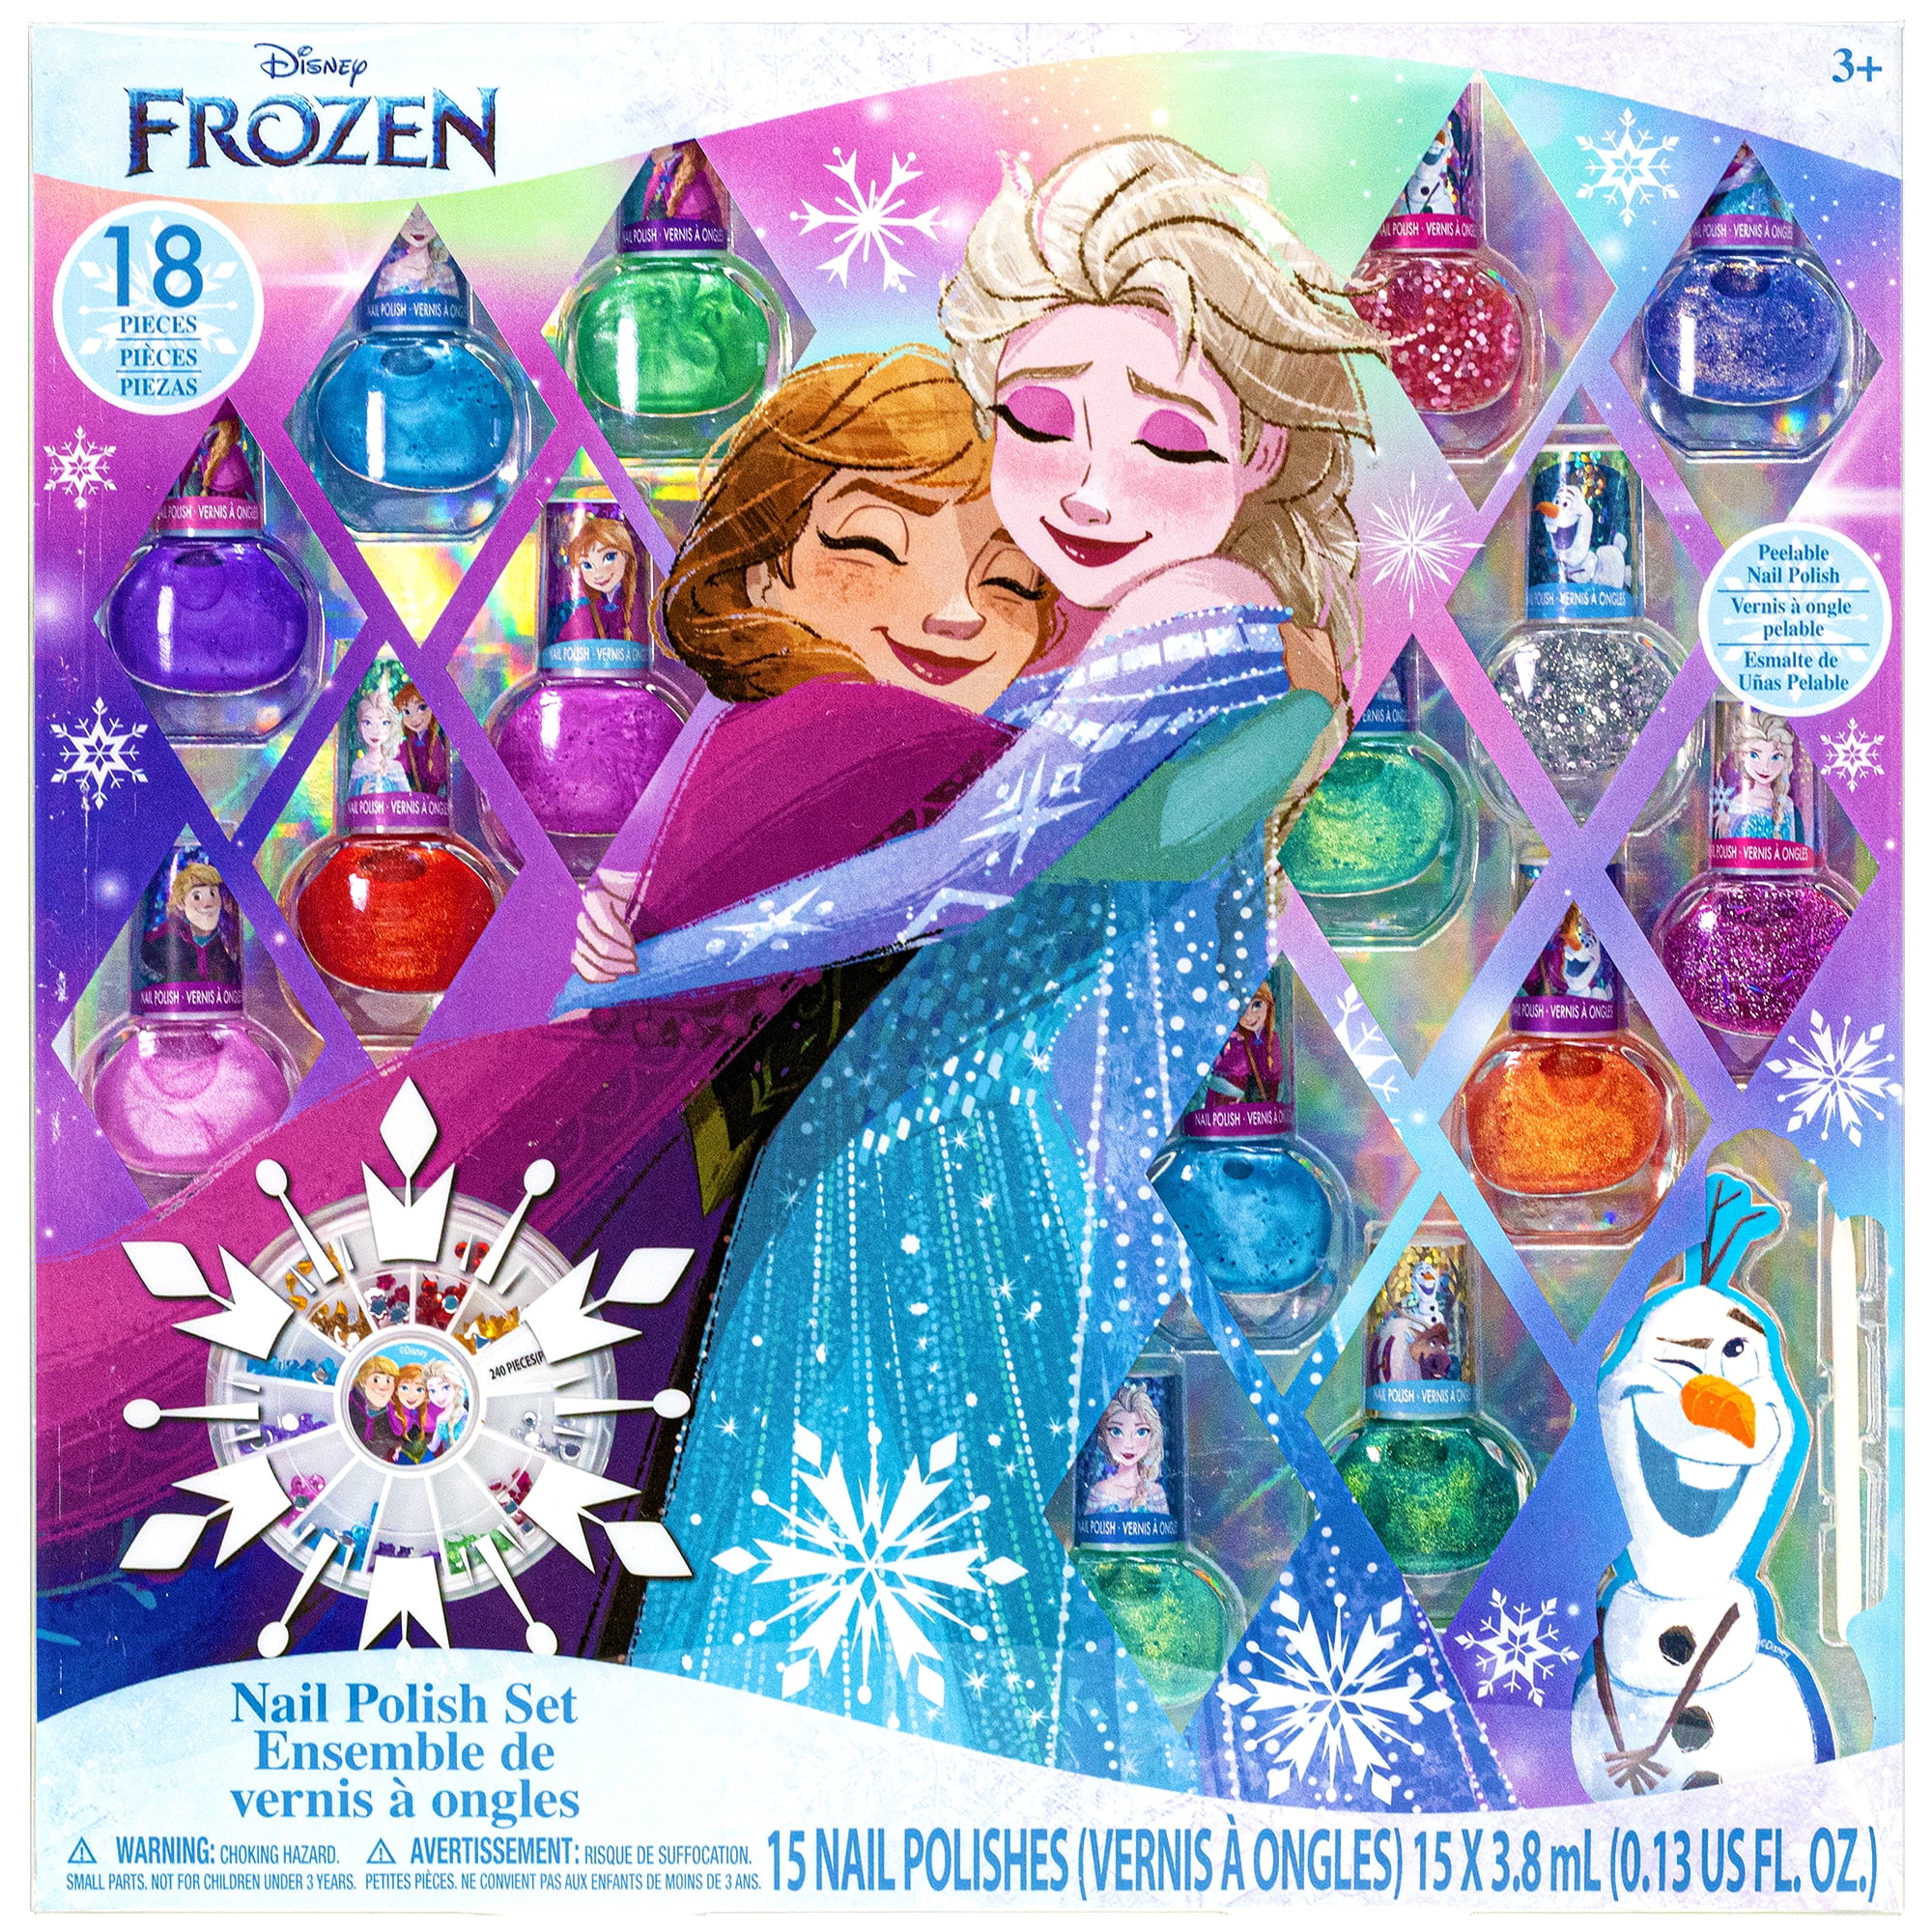 Disney Frozen Townley Girl Non Toxic Peel off Nail Polish Set Shimmery Opaque Colors Gems Girls Ages 3 Perfect Parties Sleepovers Makeovers 18 Pcs 9cd441fd eff6 4a87 830b 1752a41e6ab7.360703d685dd2e08fe1fce23088d5ced